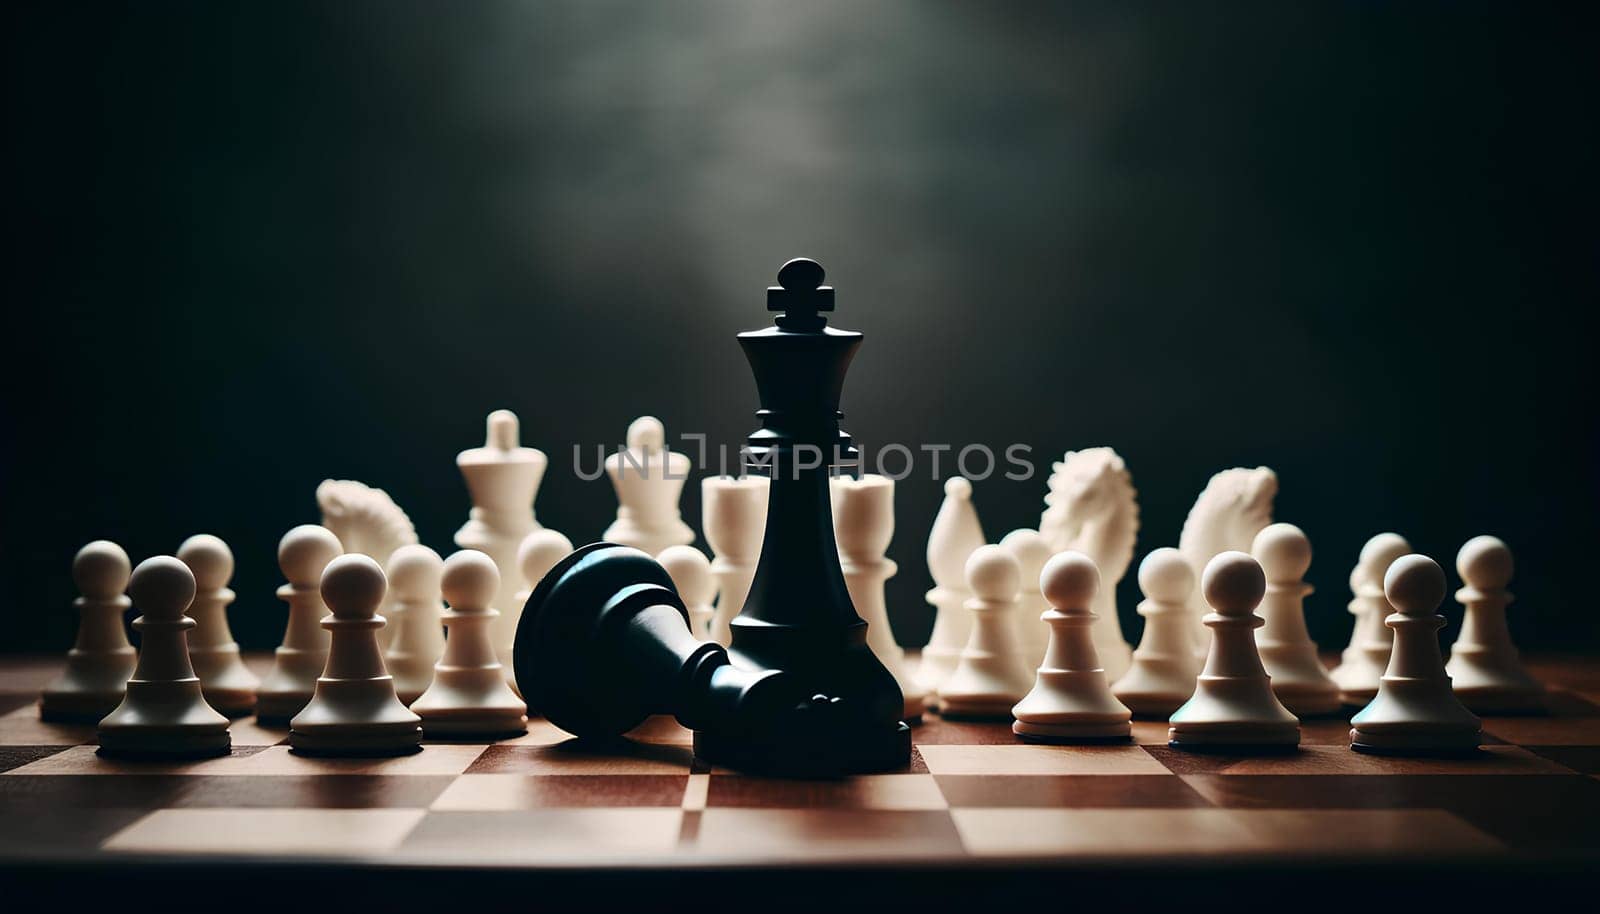 fallen black king chess piece surrounded by standing white pawns on the chessboard, dramatic moment, defeat concept by Annado